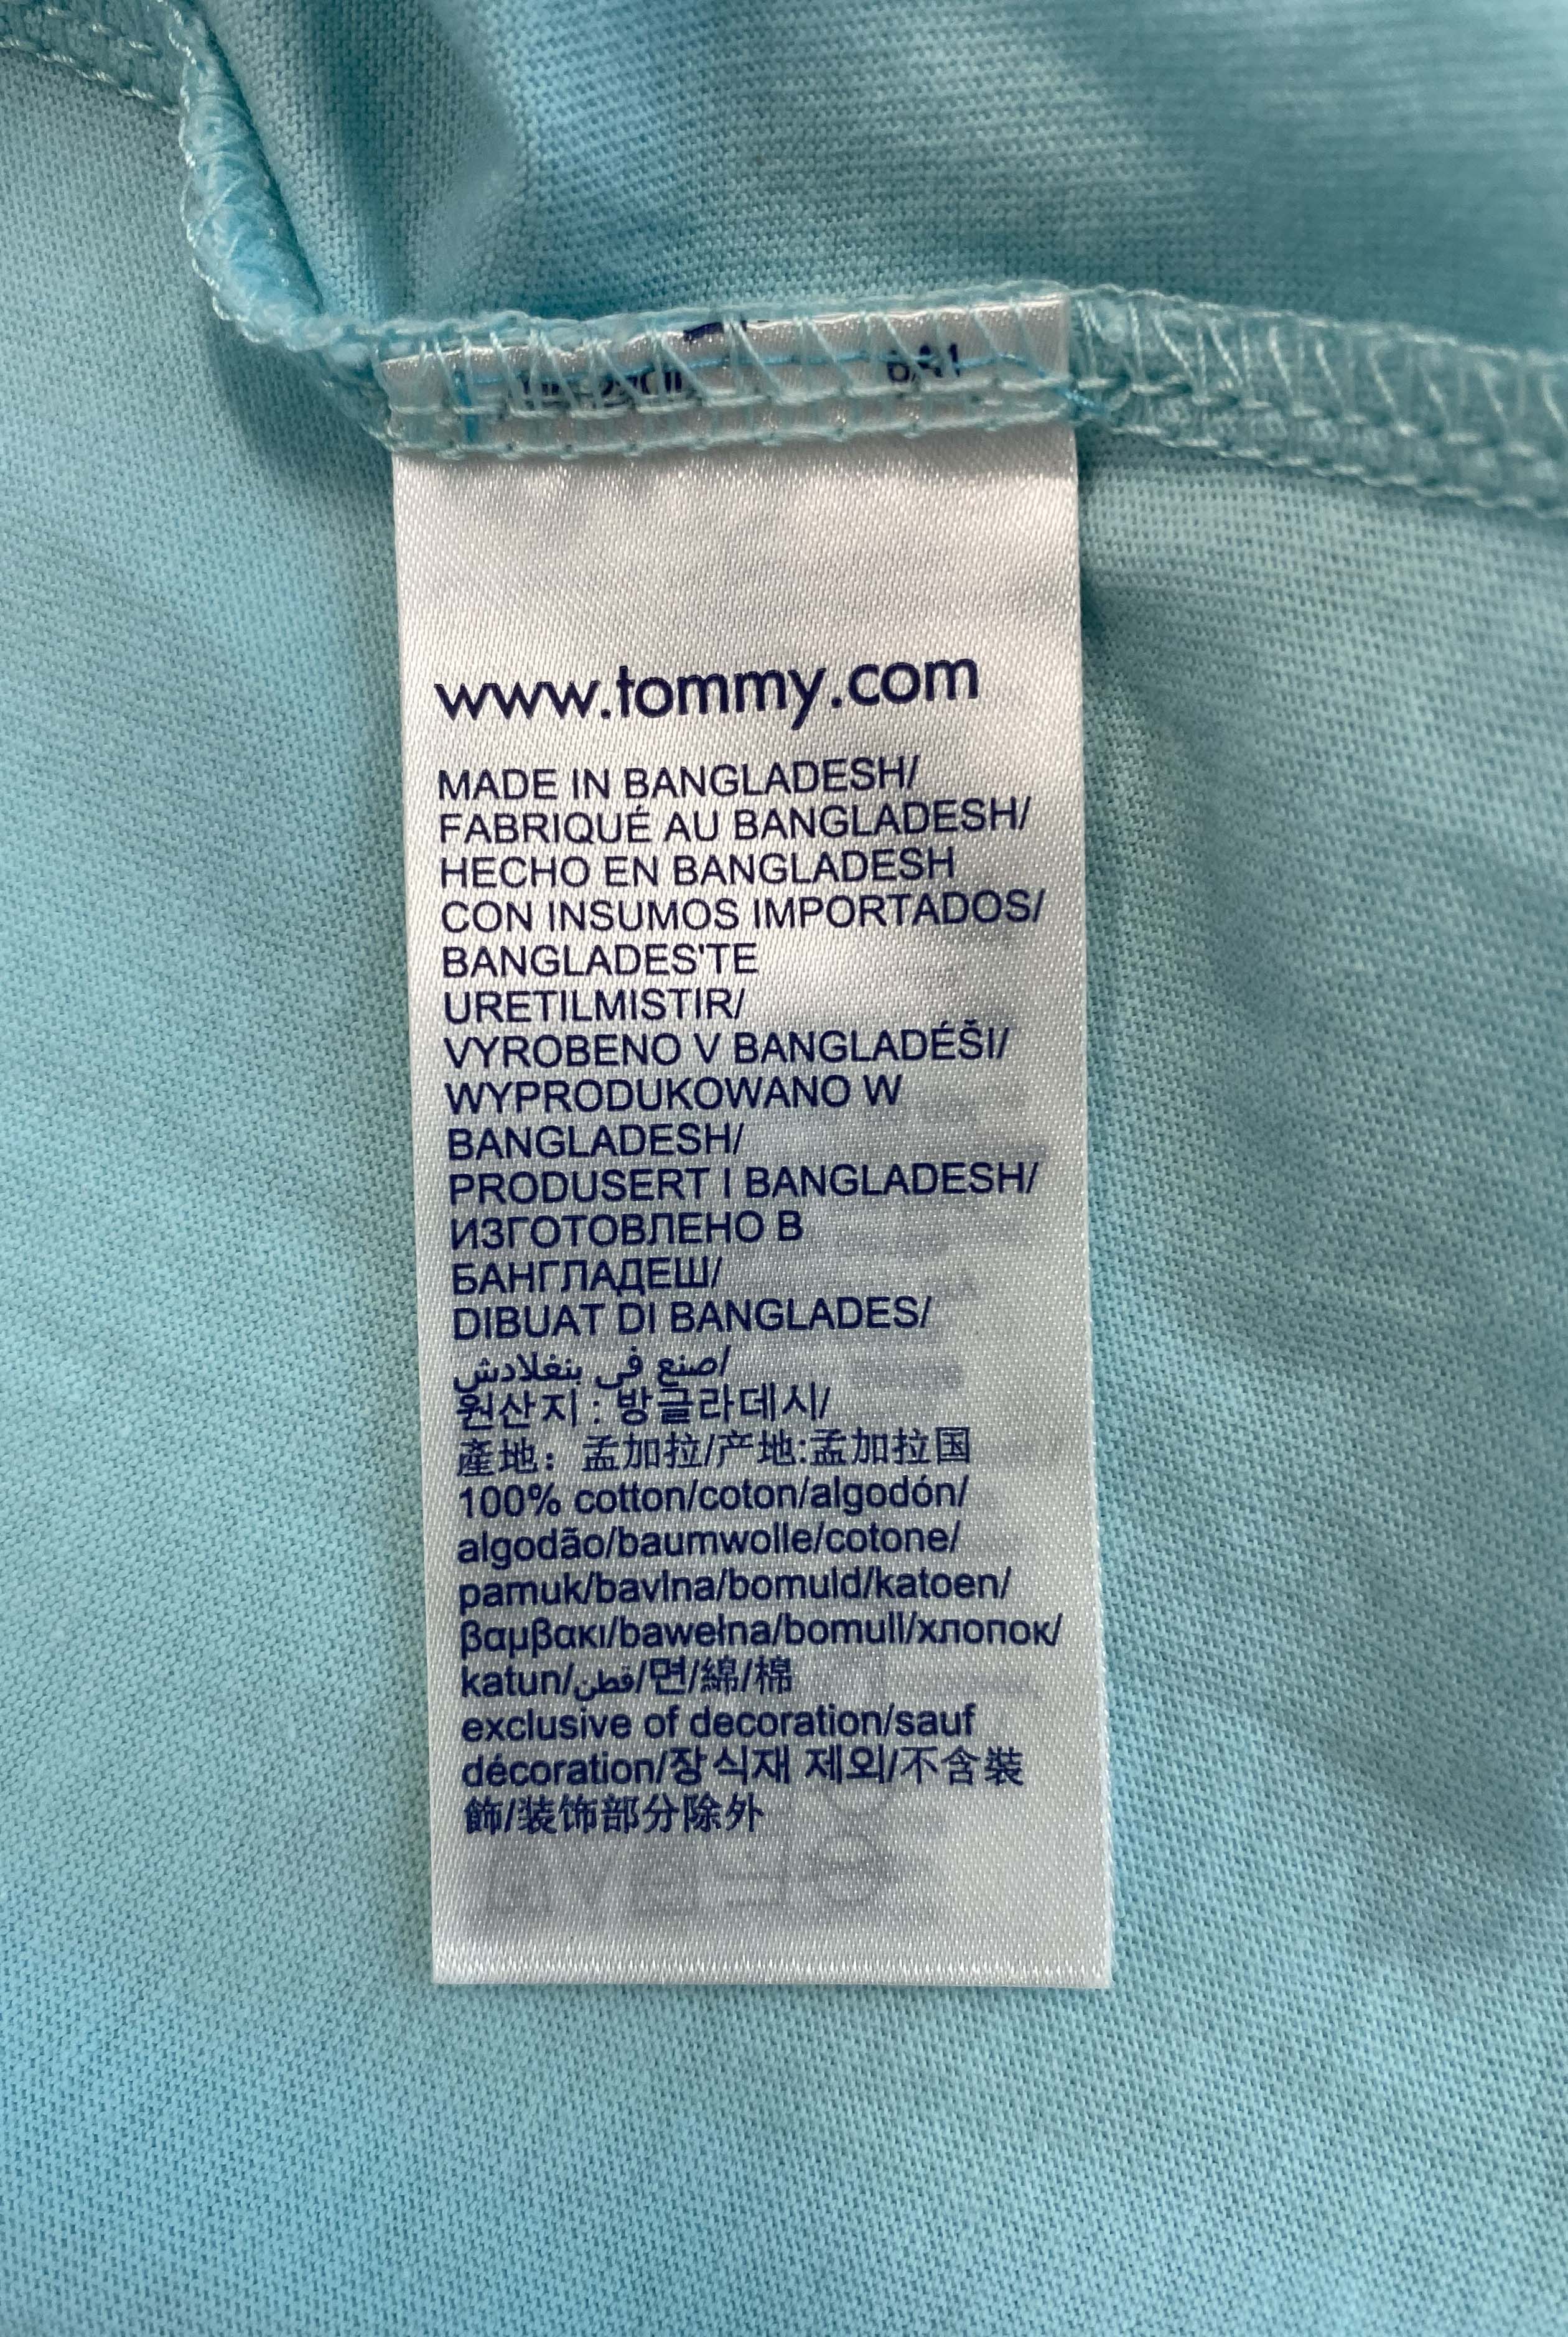 TOMMY T-Shirt